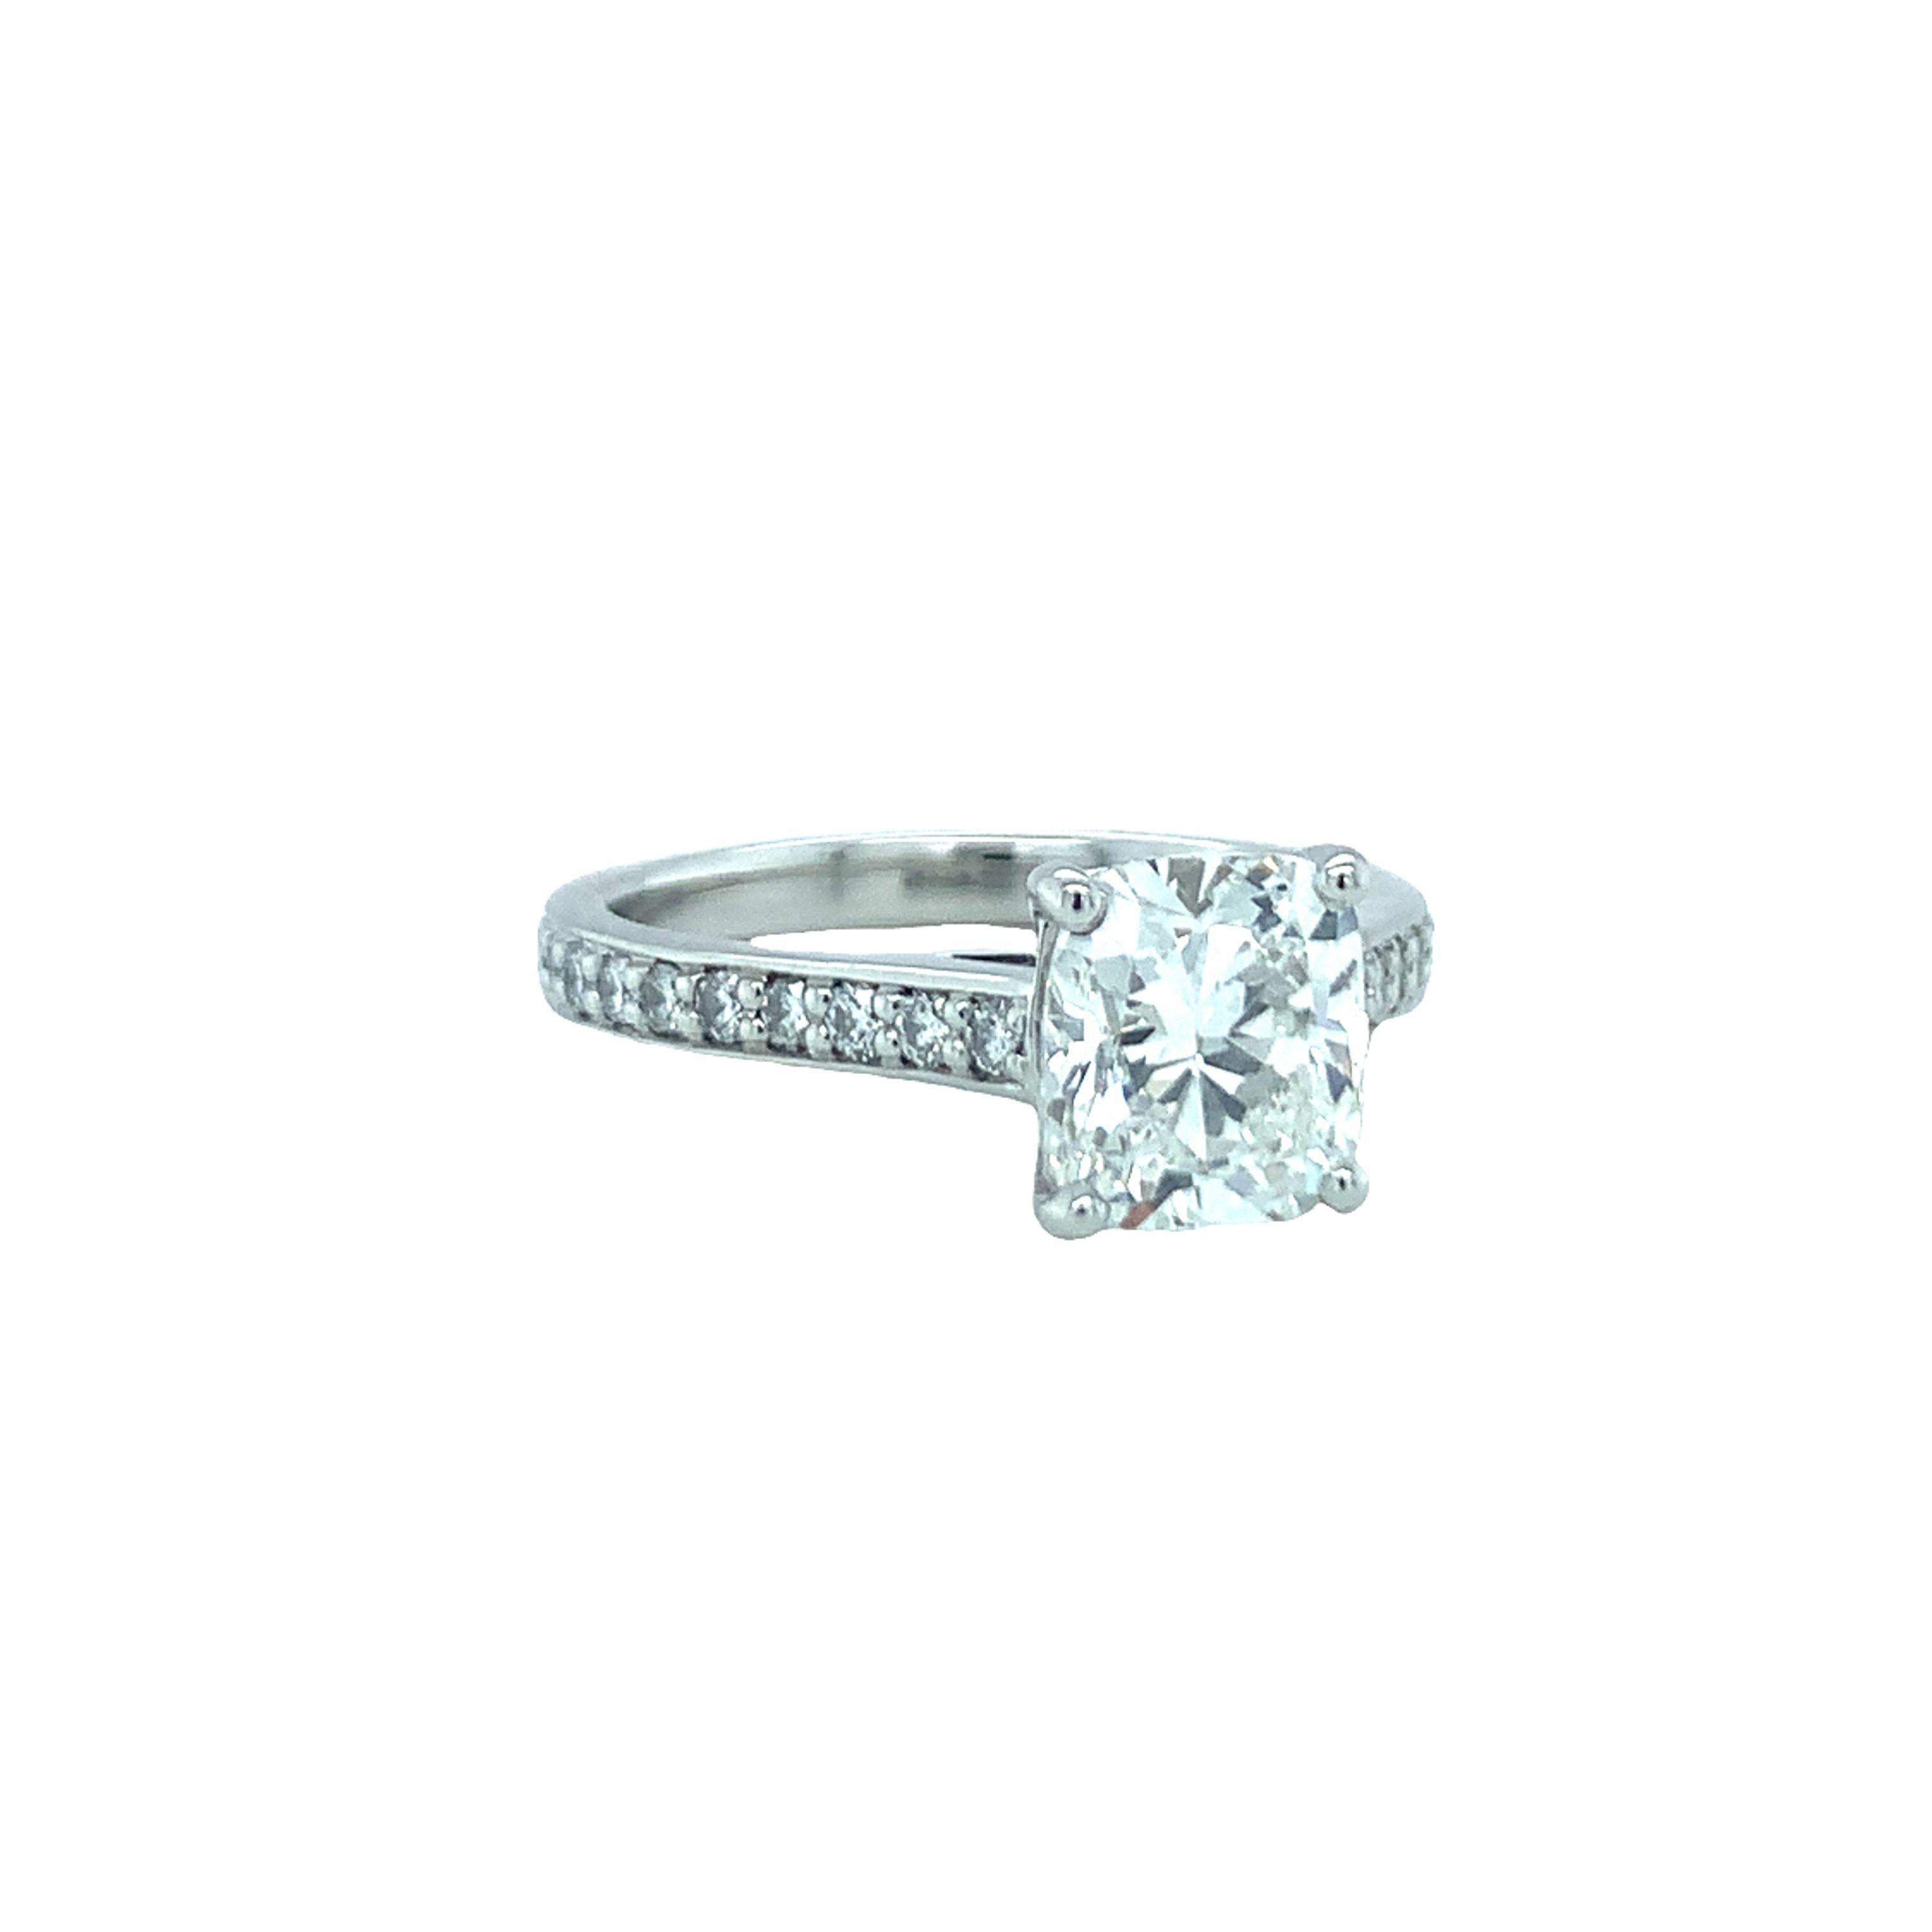 One GIA certified 1.81 ct. diamond platinum engagement ring centering one prong set, cushion modified brilliant diamond weighing 1.81 ct. with GIA cert stating G color and SI-1 clarity. Enhanced by 43 bead set, round brilliant cut diamonds totaling